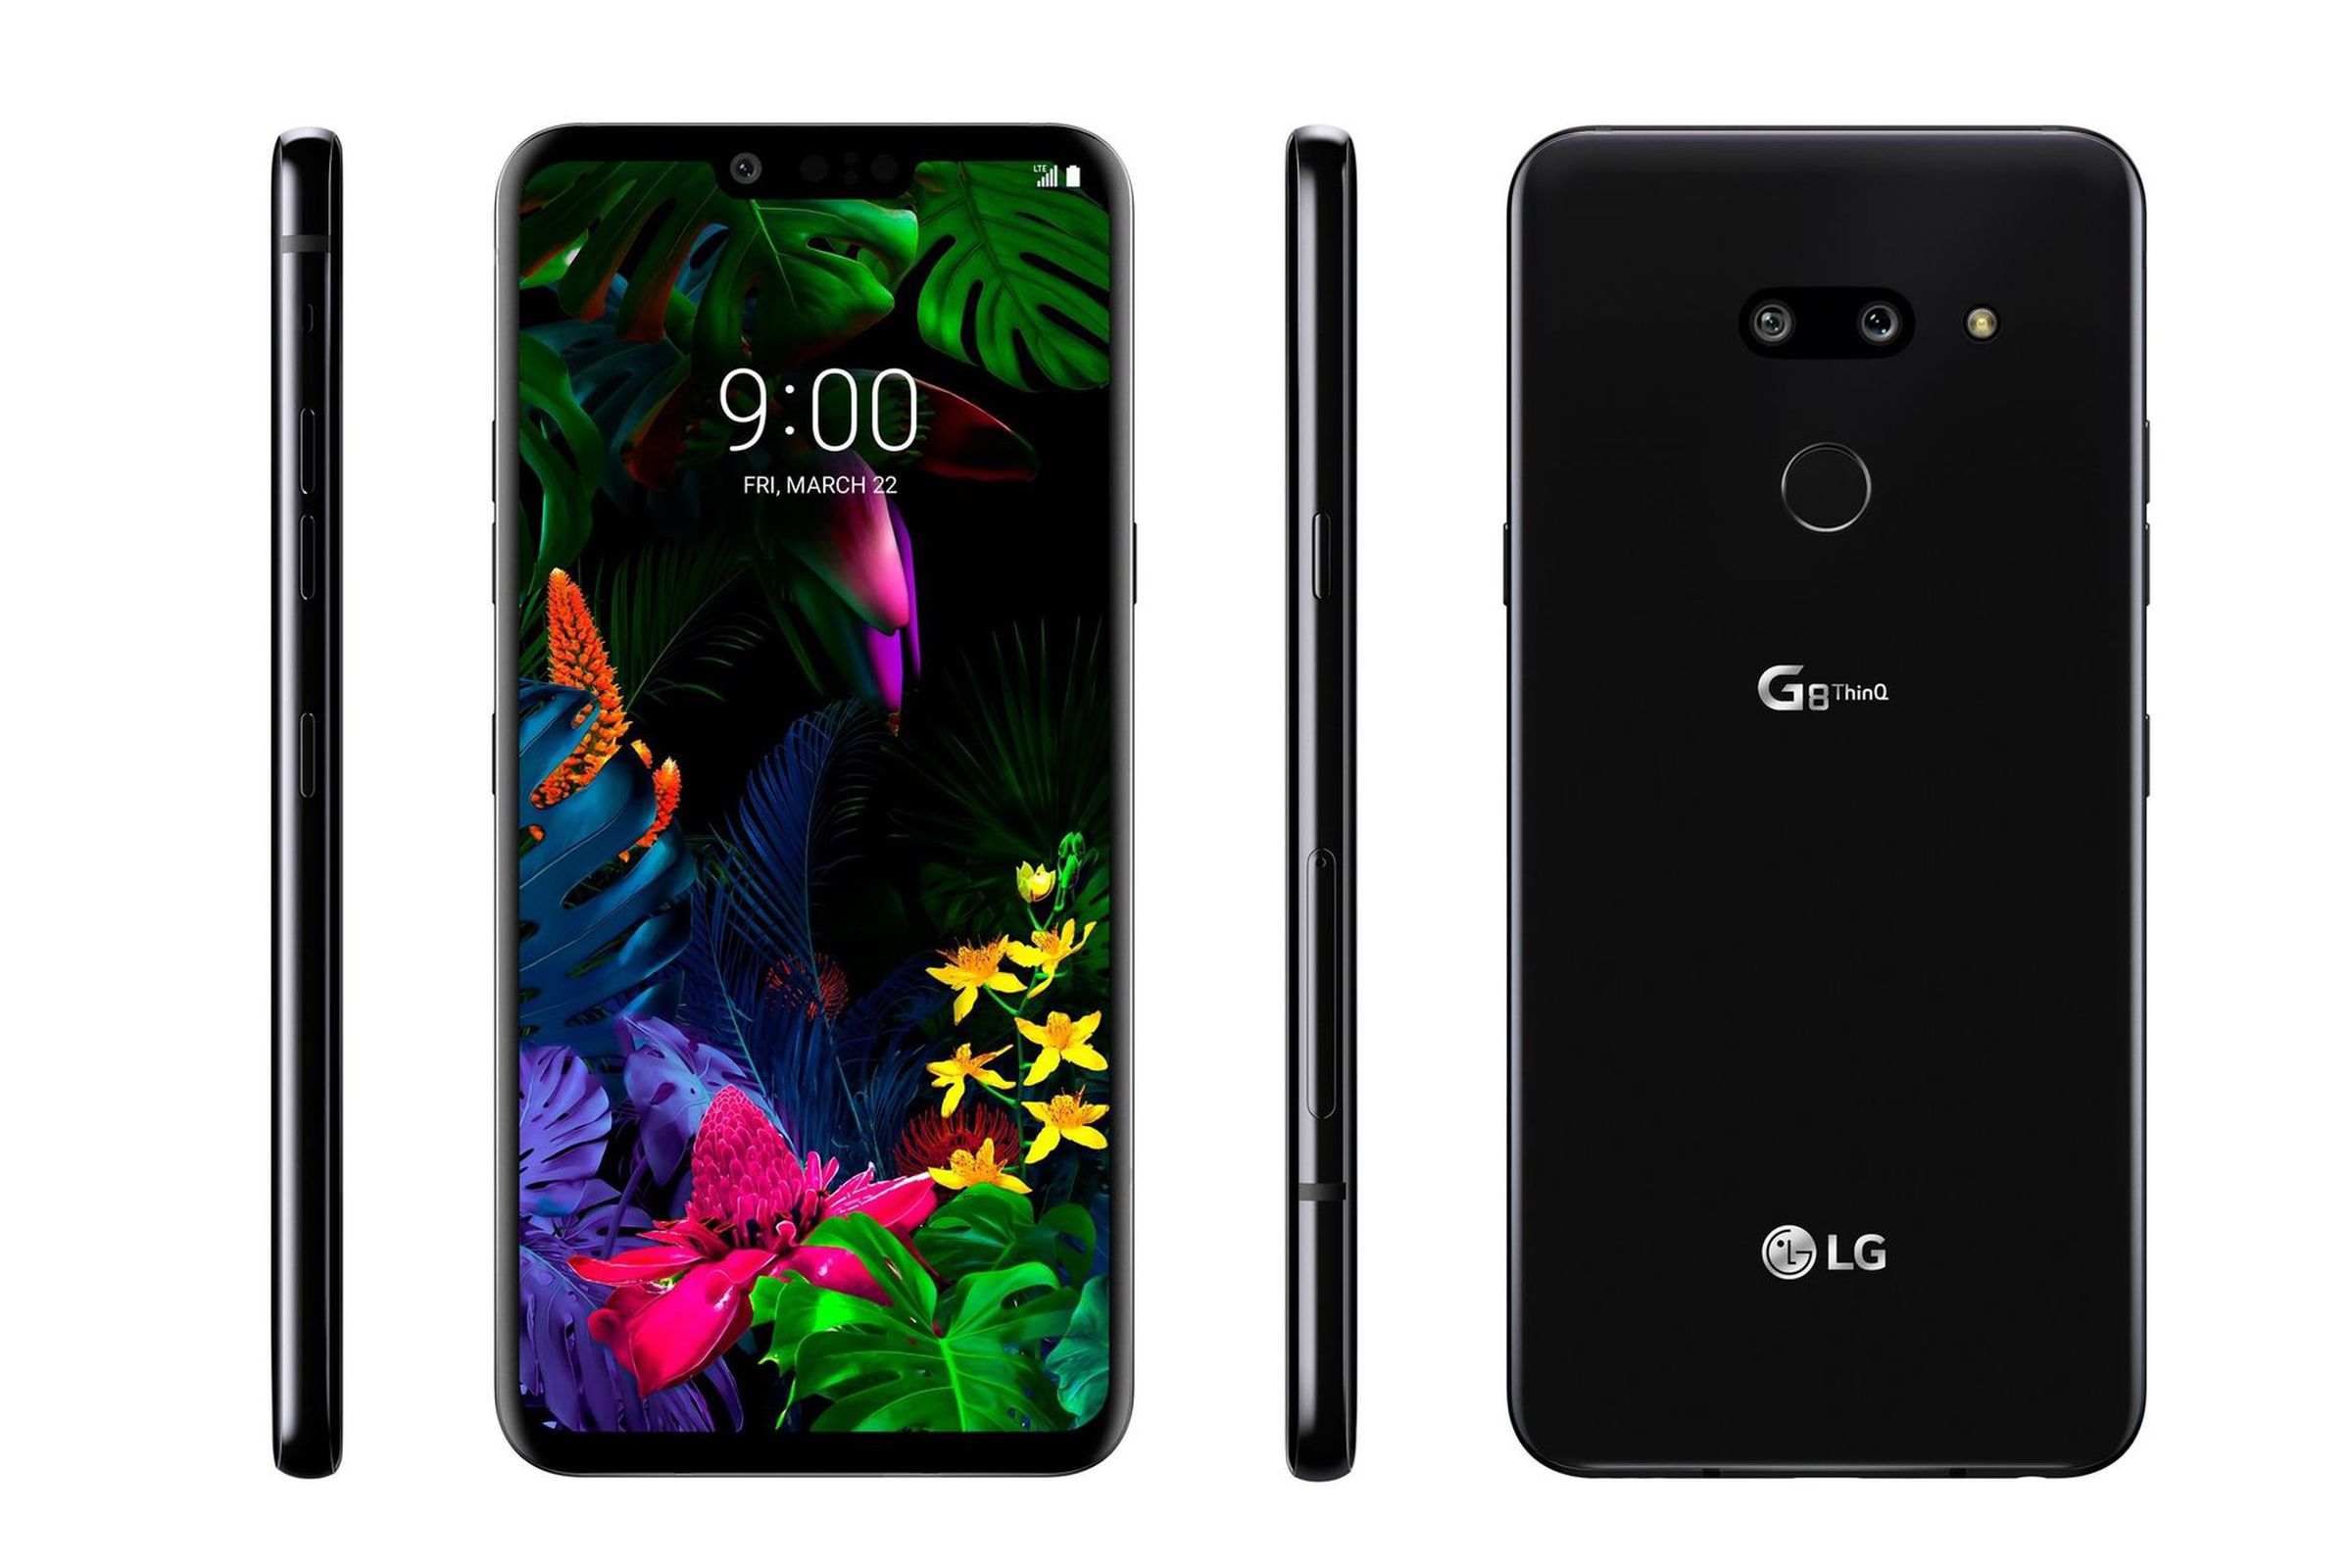 The LG G8 (pictured here in a leaked image) will have a vibrating OLED screen that can act as a speaker. 